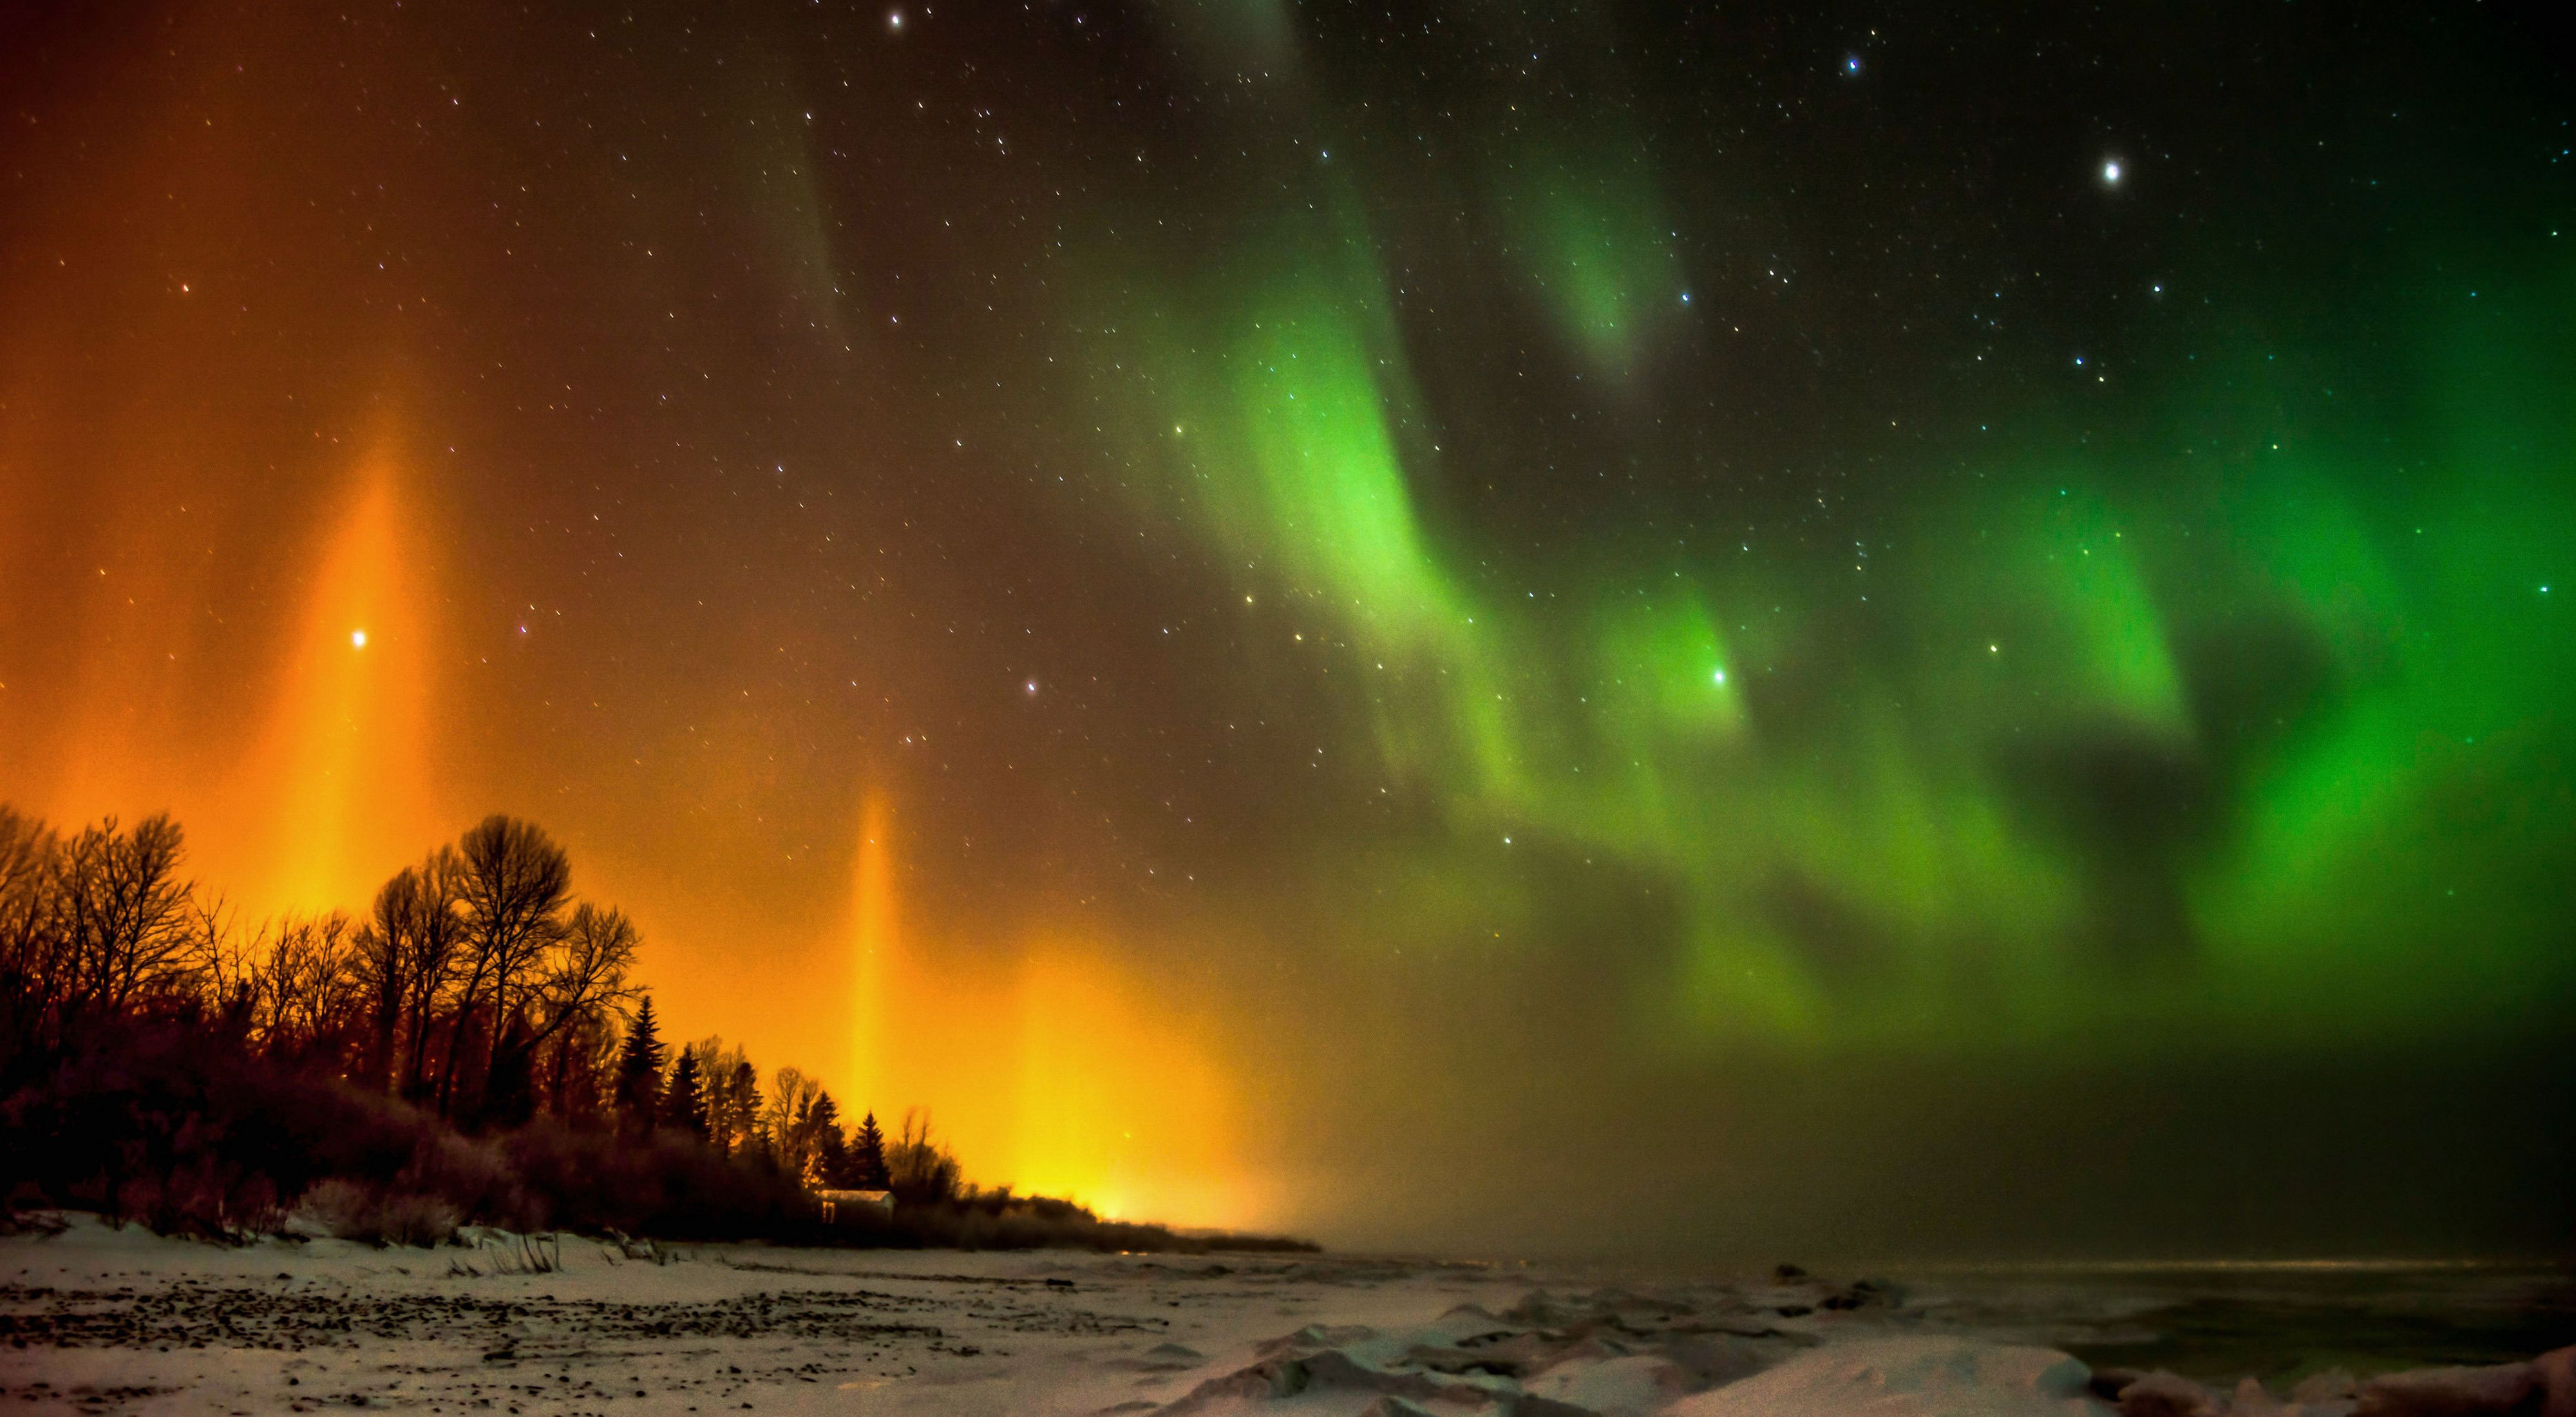 Northern Lights; South shore of Lesser Slave Lake in Alberta, Canada